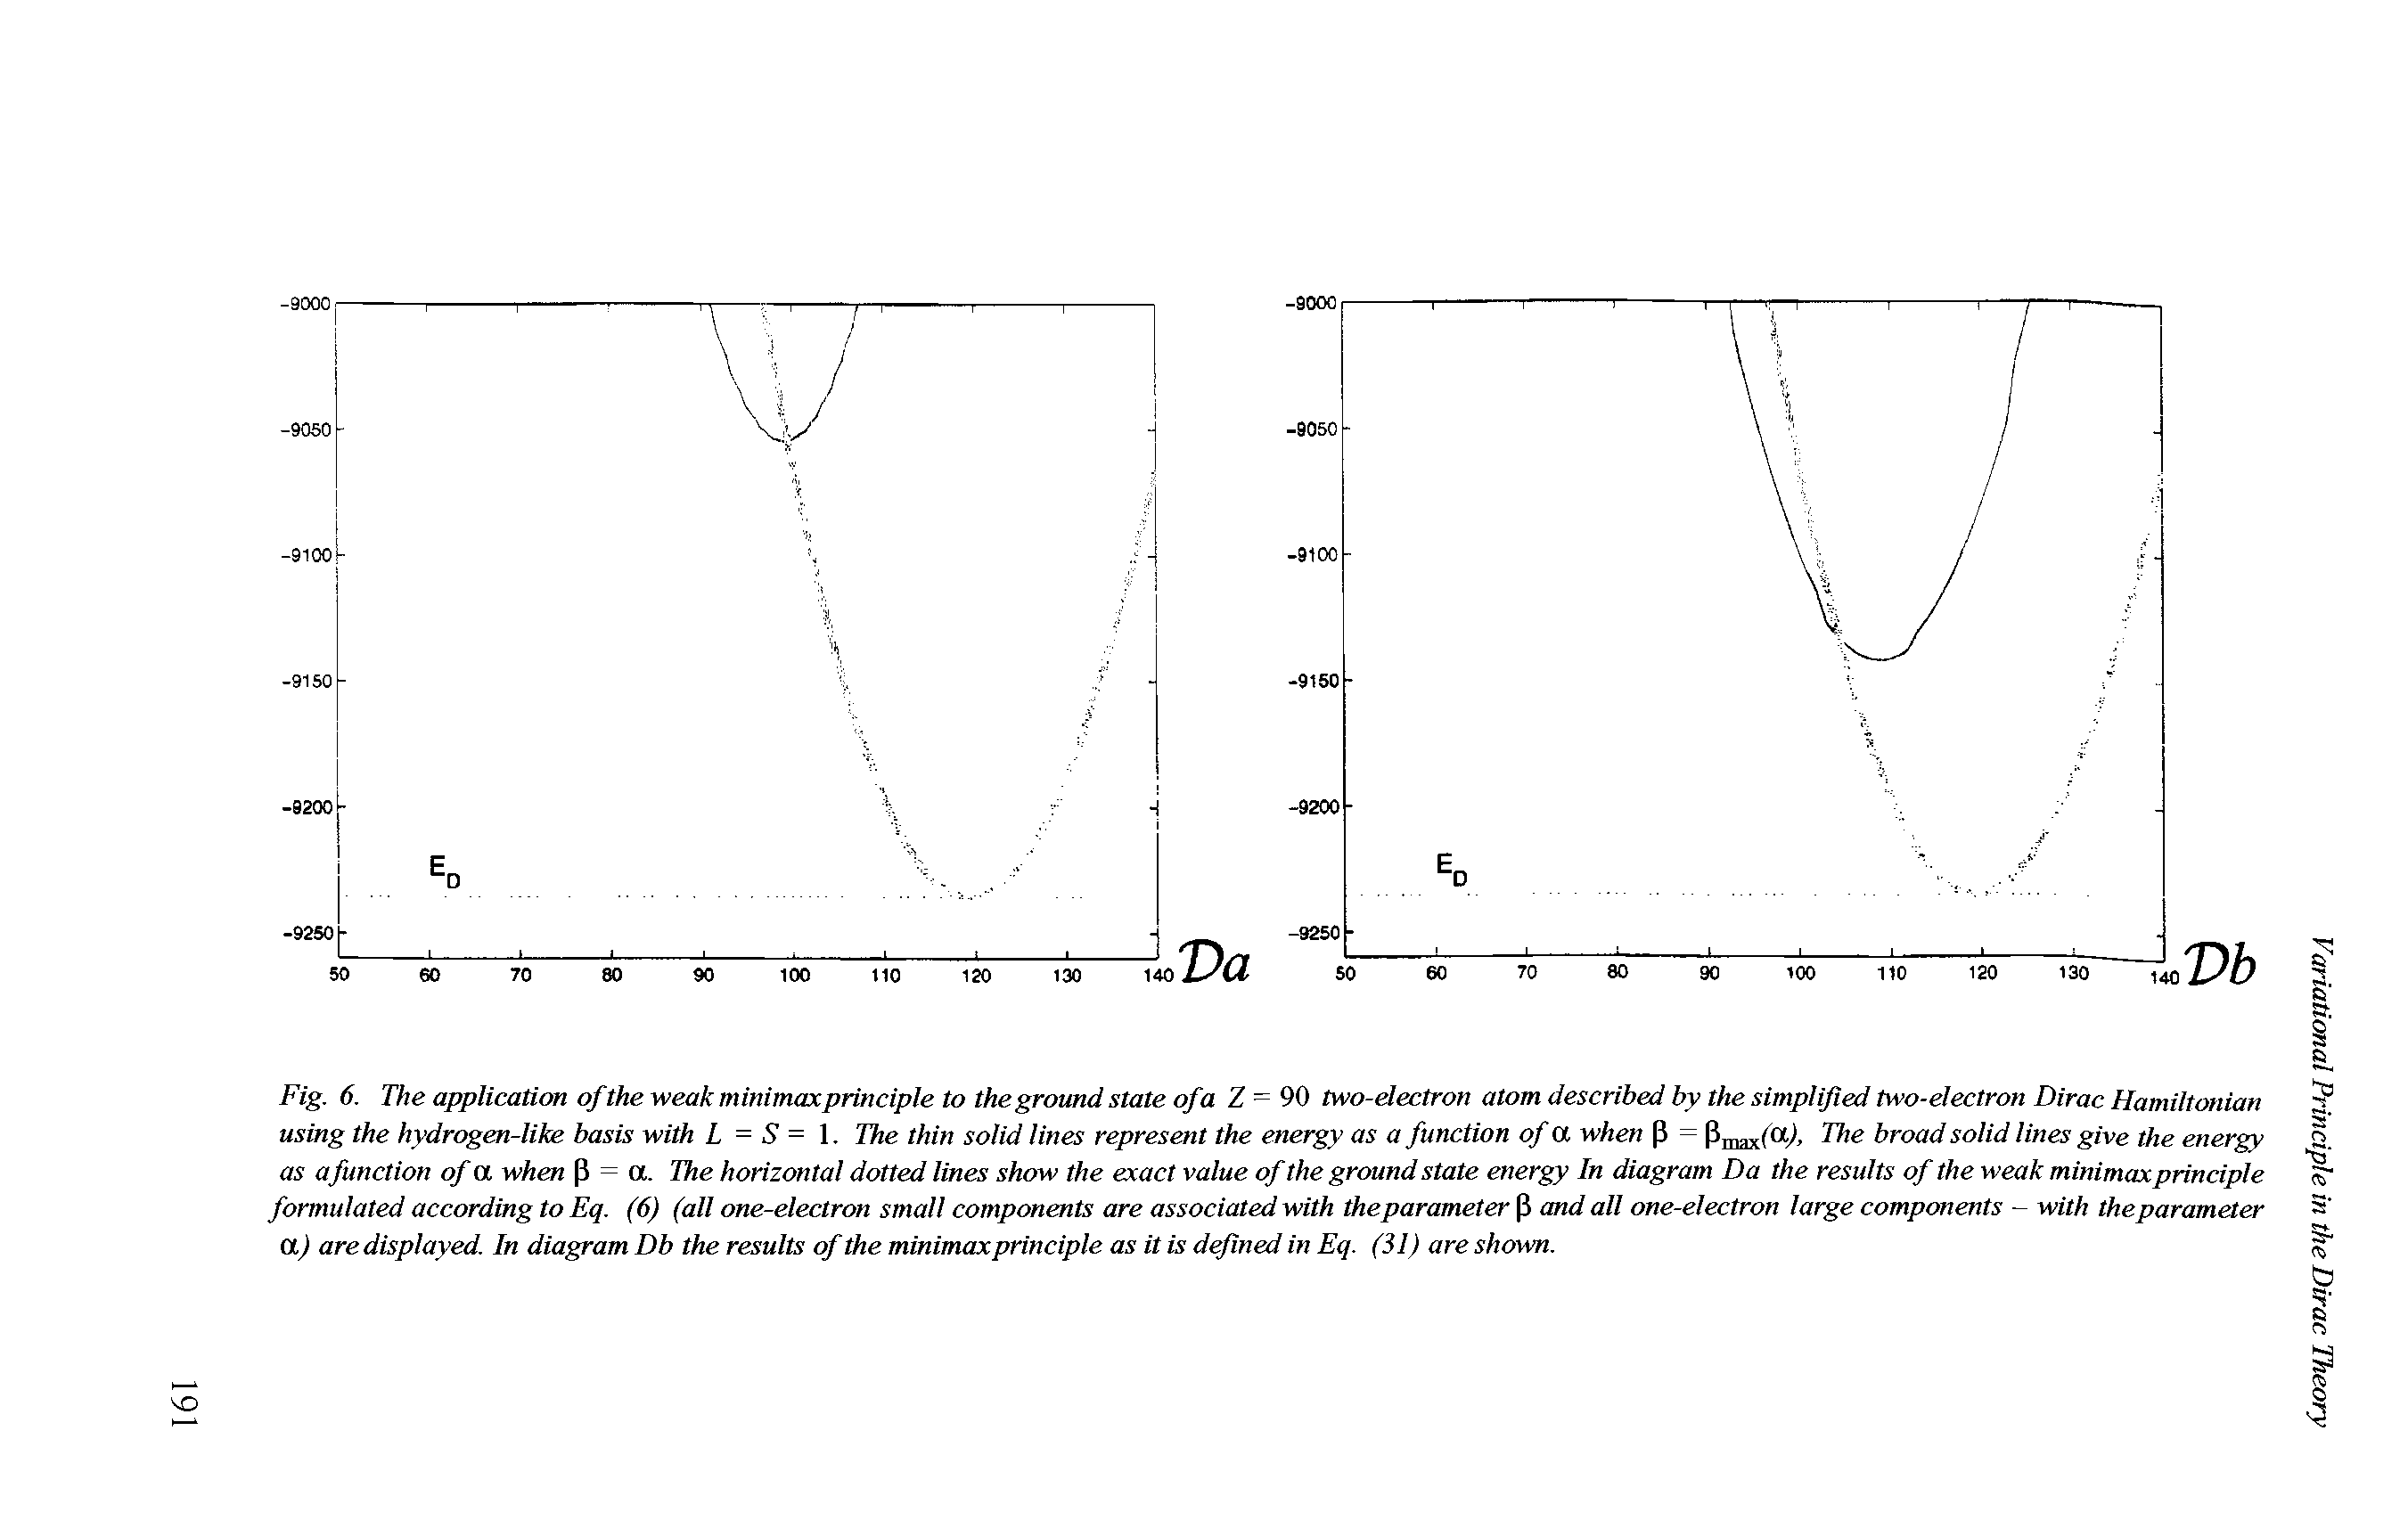 Fig. 6. The application of the weak minimaxprinciple to the ground state of a Z = 90 two-electron atom described by the simplified two-electron Dirac Hamiltonian using the hydrogen-tike basis with L = S = 1. The thin solid lines represent the energy as a function of a when (3 = broad solid lines give the energy...